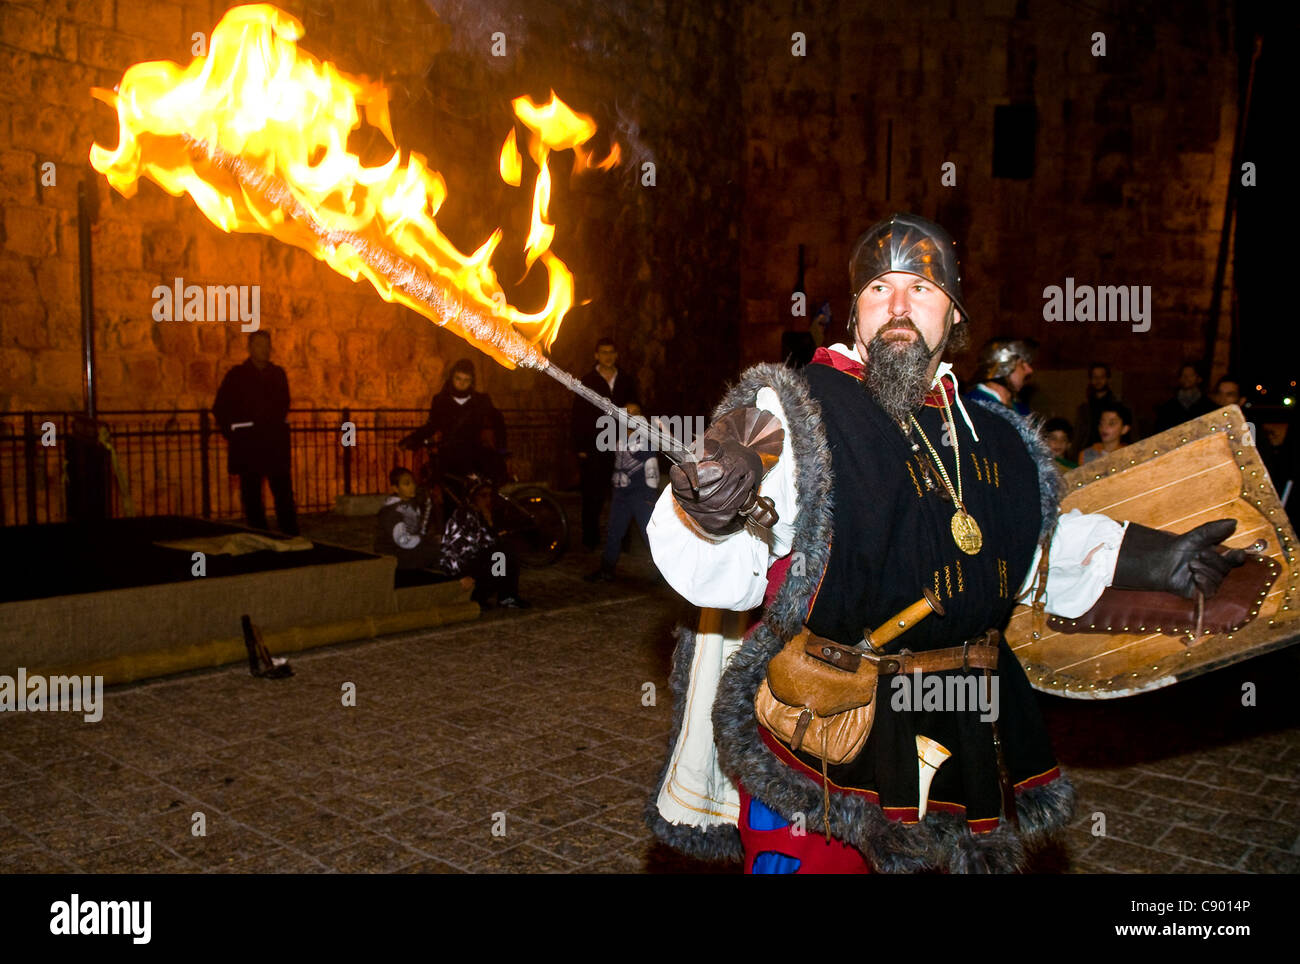 An Italian actor dresses as knight fight with sword and fire in the annual medieval style knight festival Stock Photo